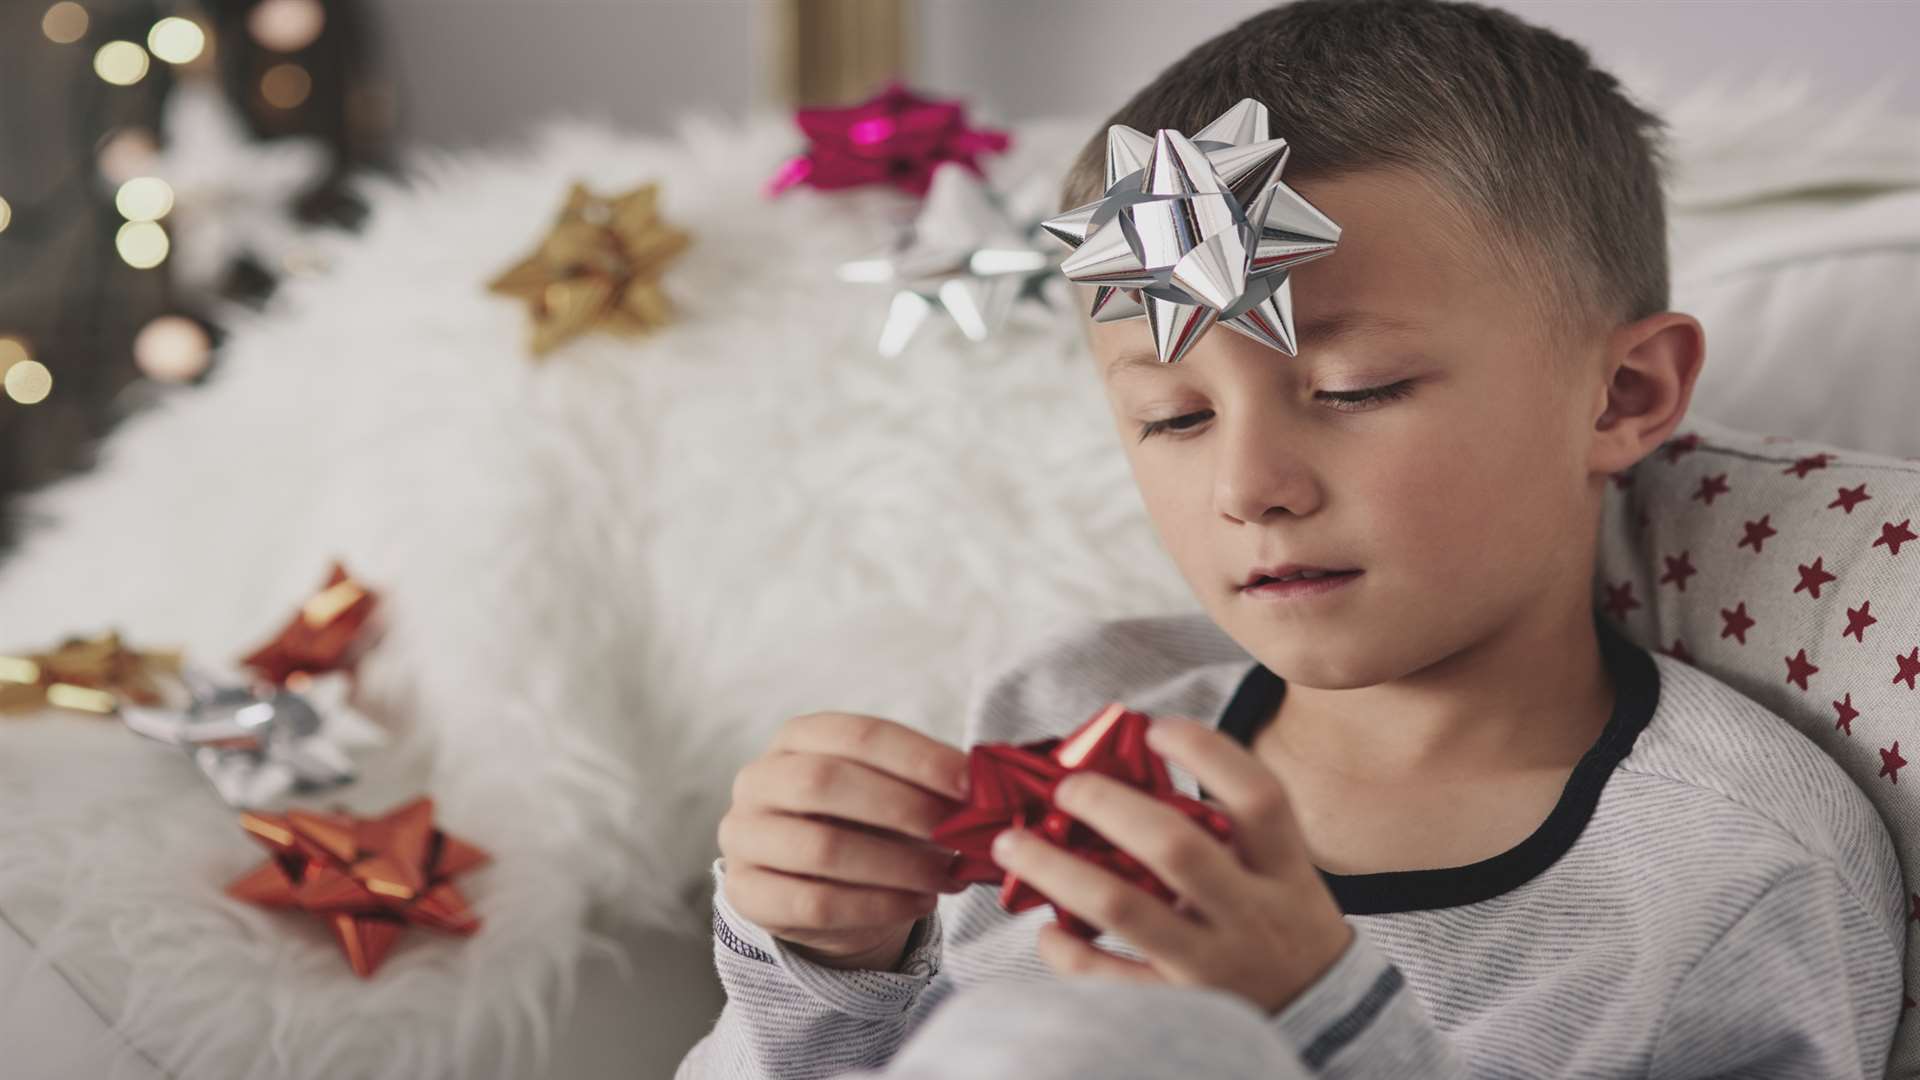 There are ways to entertain the kids in the run up to Christmas without breaking the bank